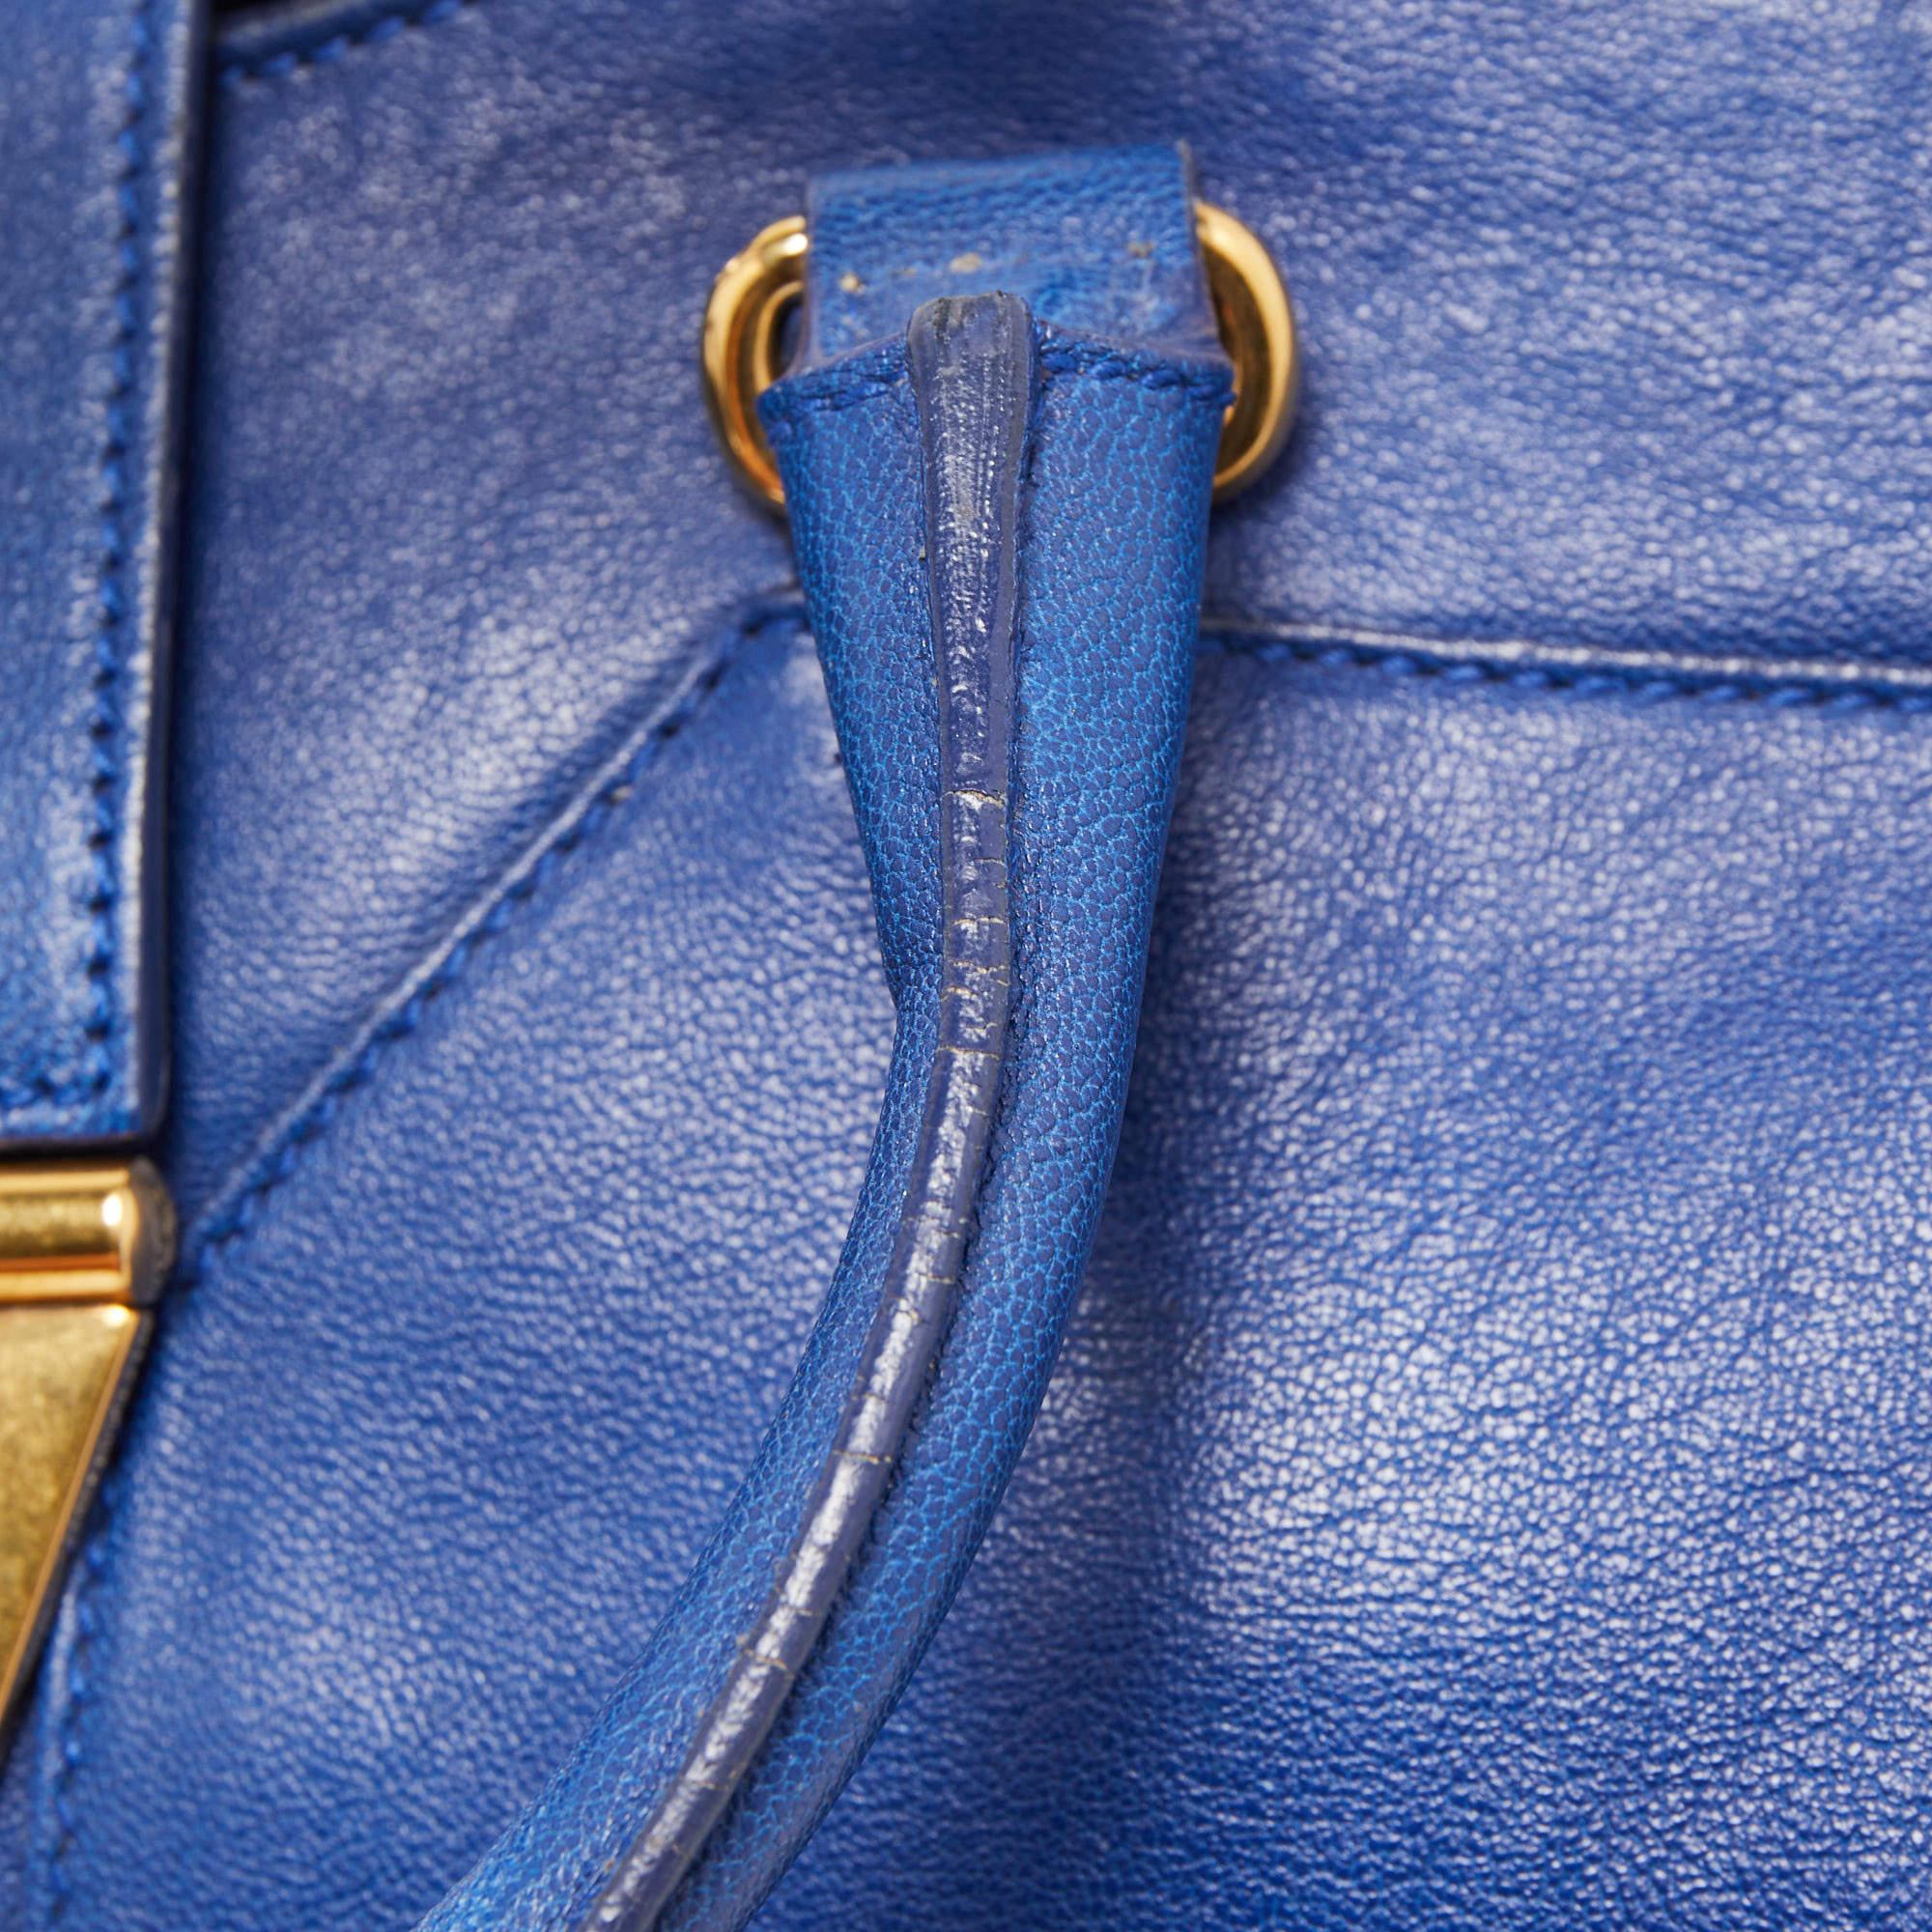 Yves Saint Laurent Blue Leather Medium Cabas Chyc Tote For Sale 7